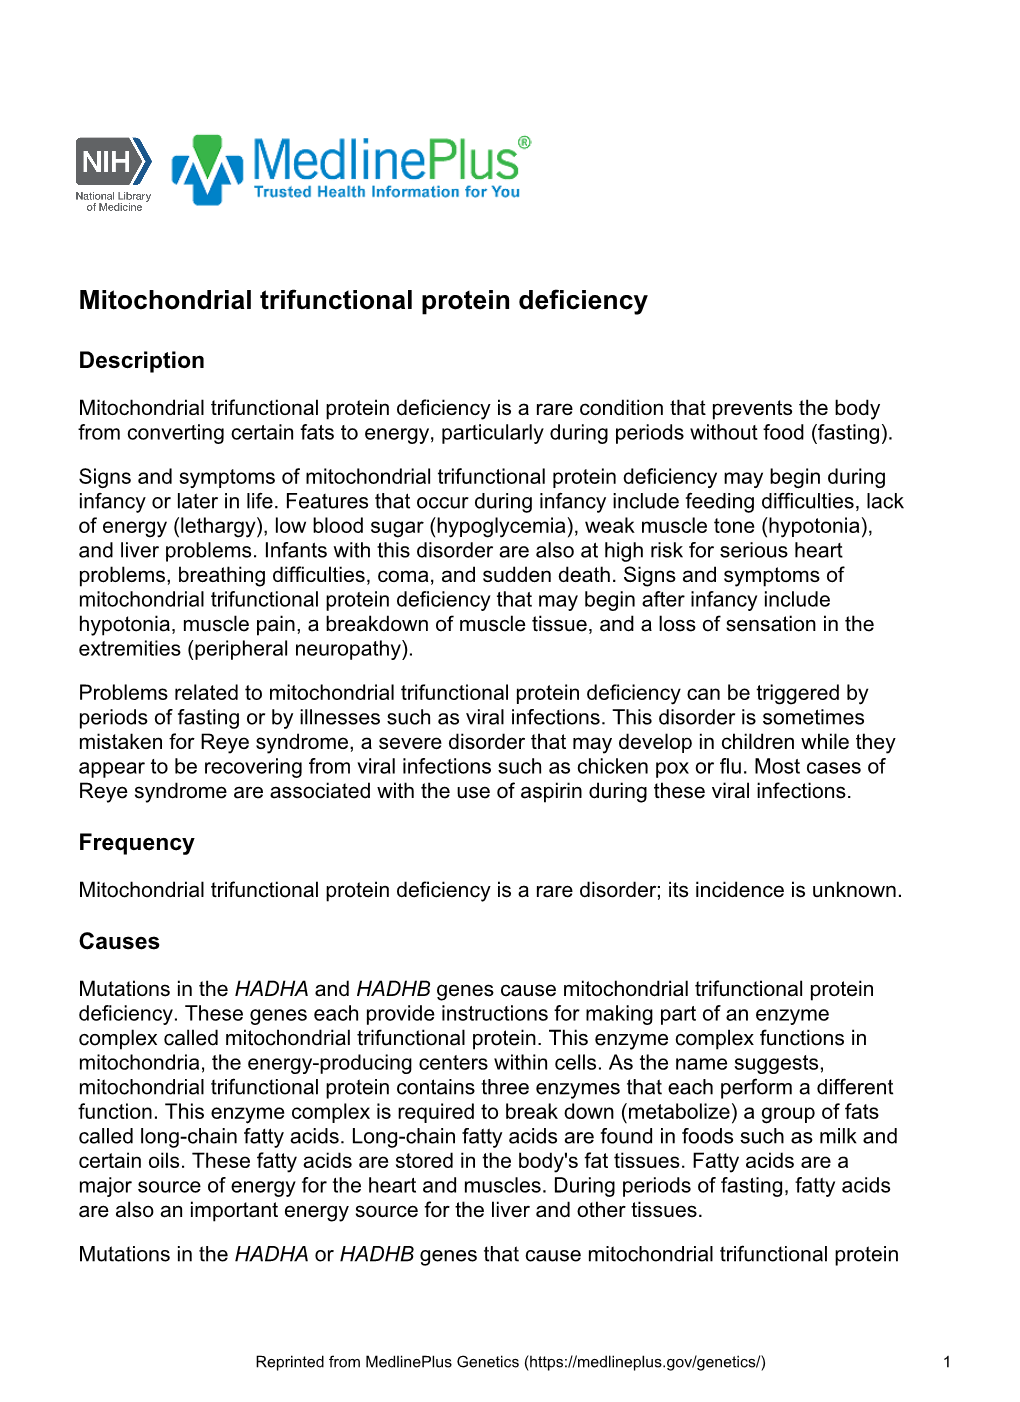 Mitochondrial Trifunctional Protein Deficiency